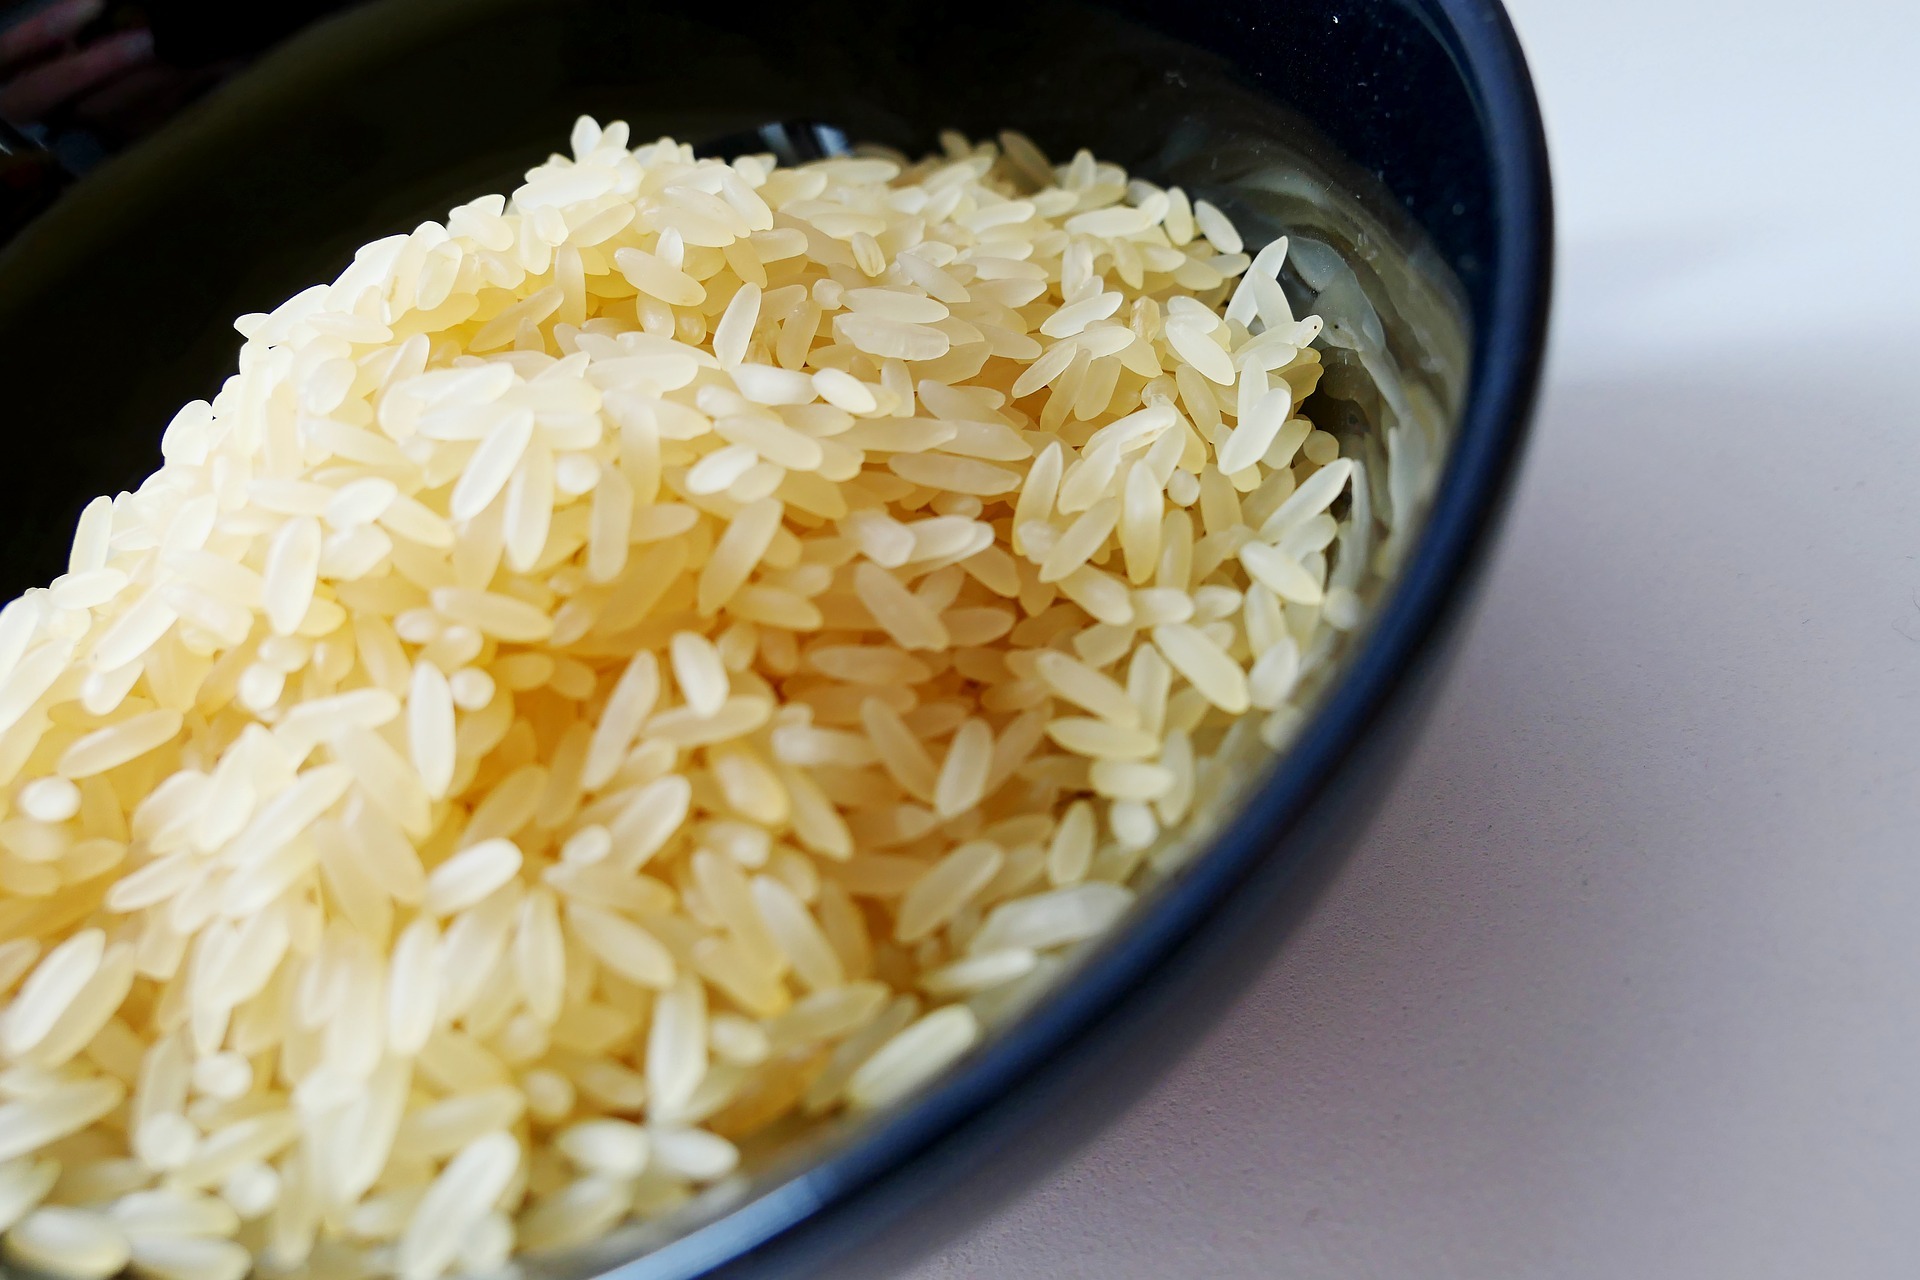 Wholesale of Indian rice for export and import - Indian Rice for Wholesale in Asian Markets - Indian Rice Supplier _ Nutex Rice Company